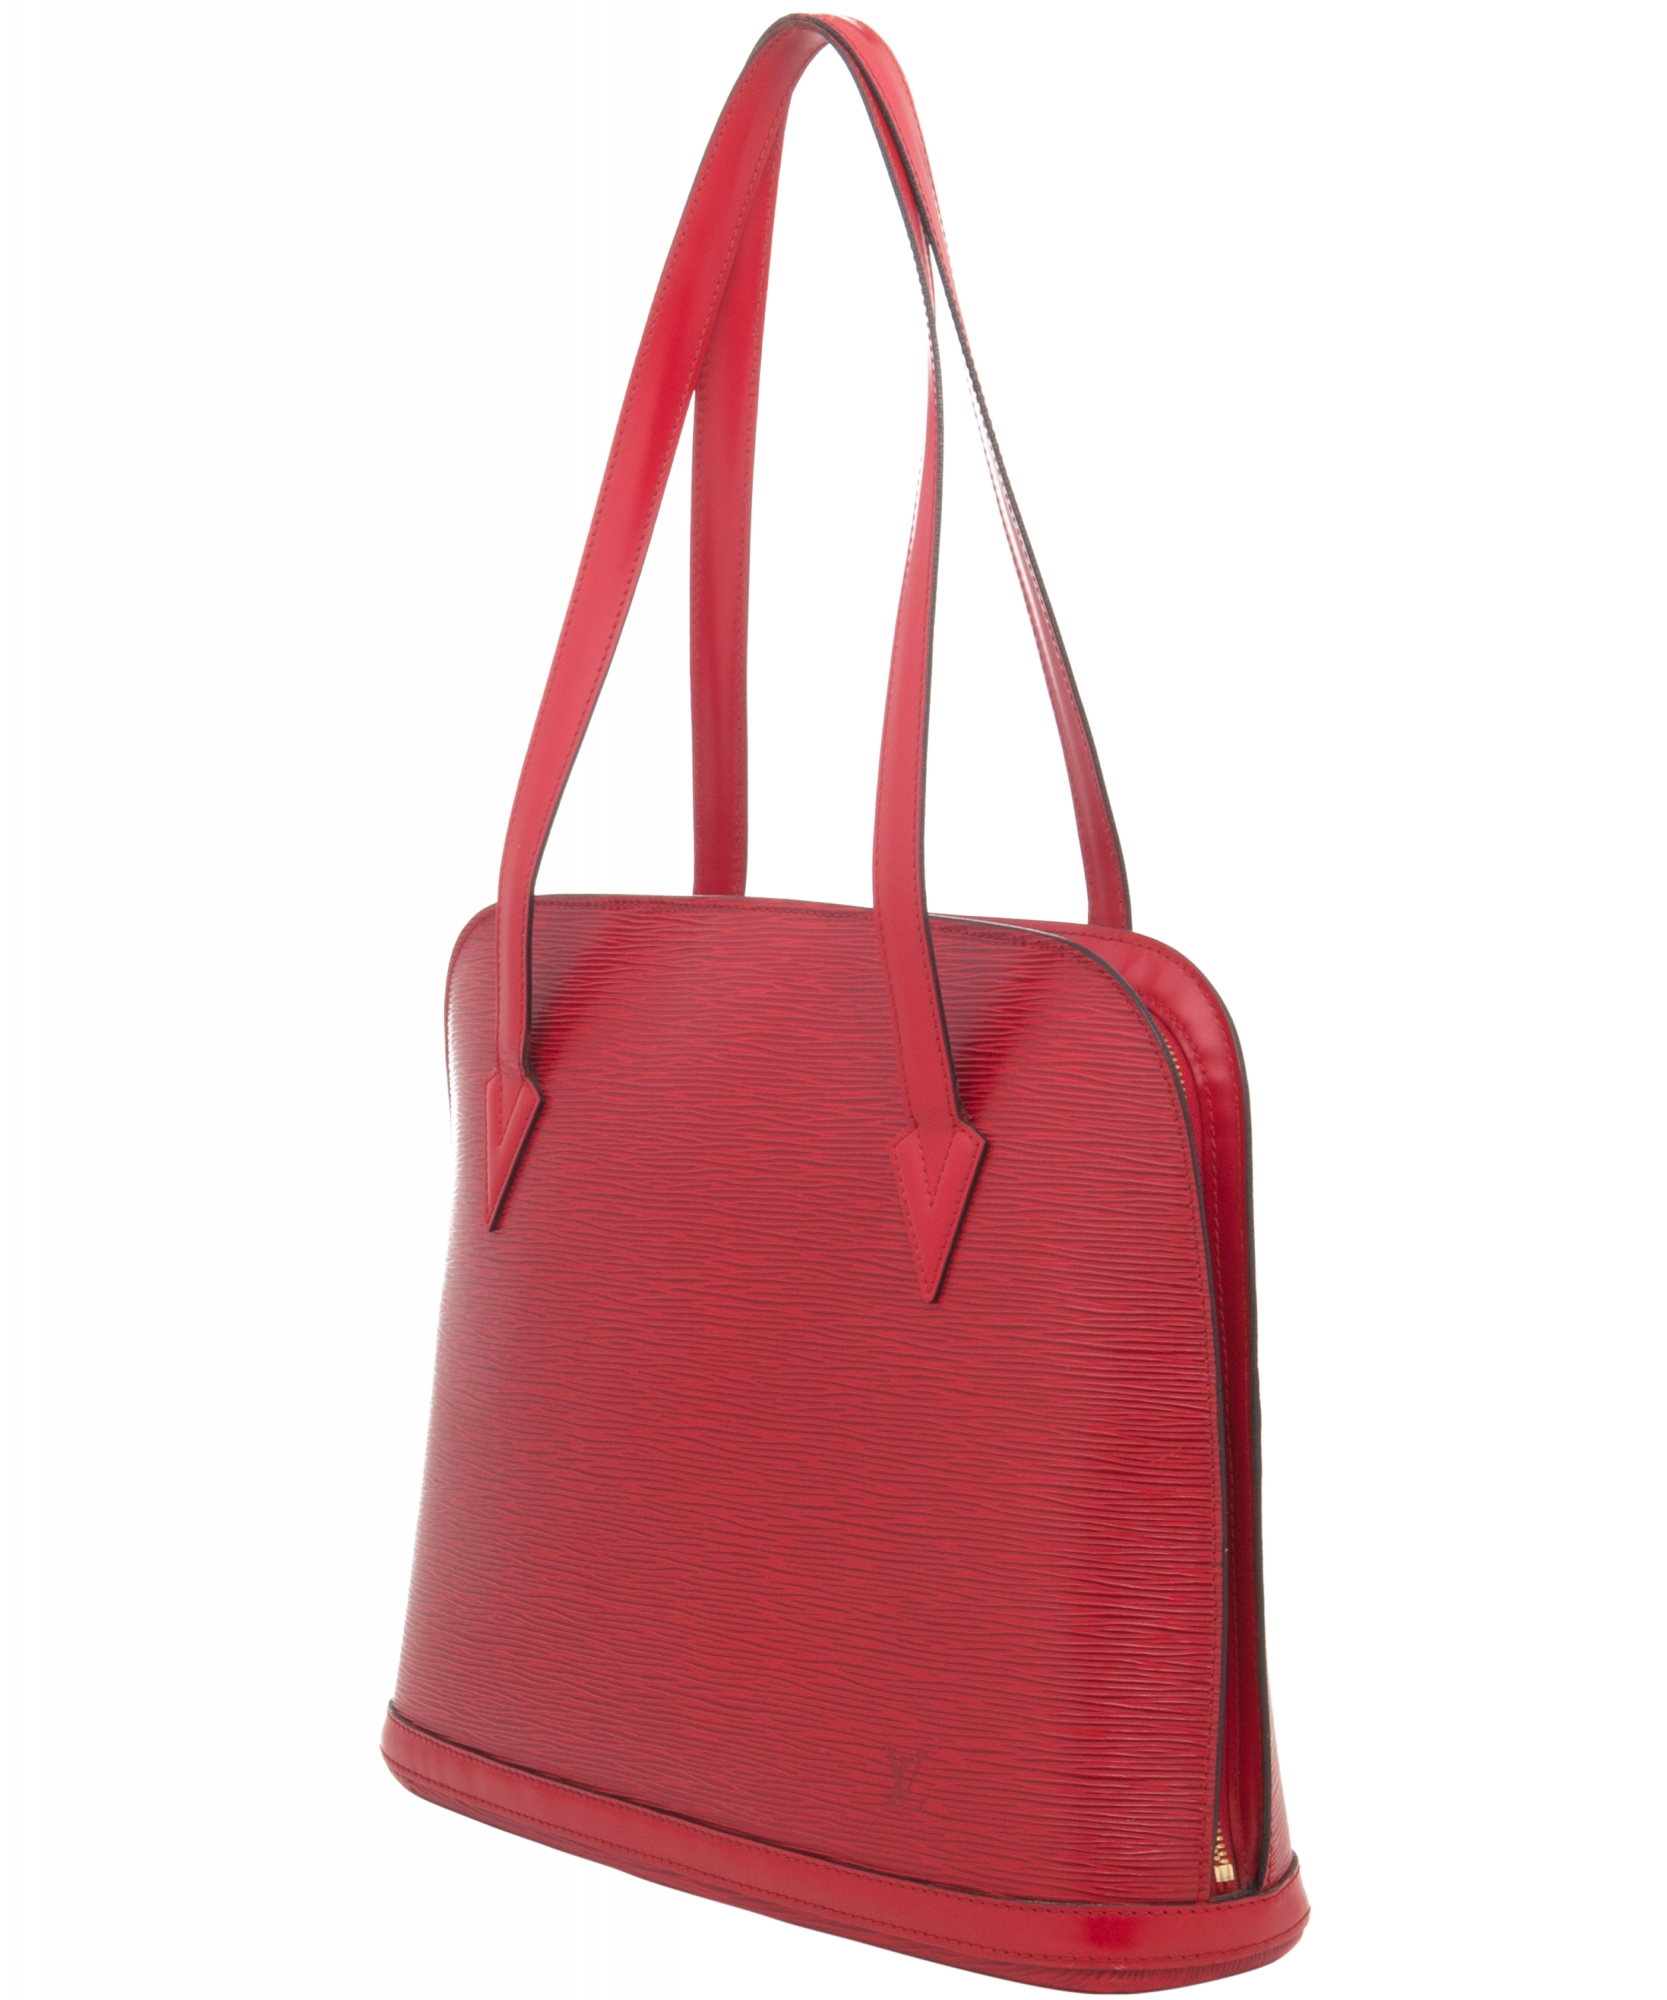 Louis Vuitton Lussac Tote Bag in Red Epi Leather | La Doyenne